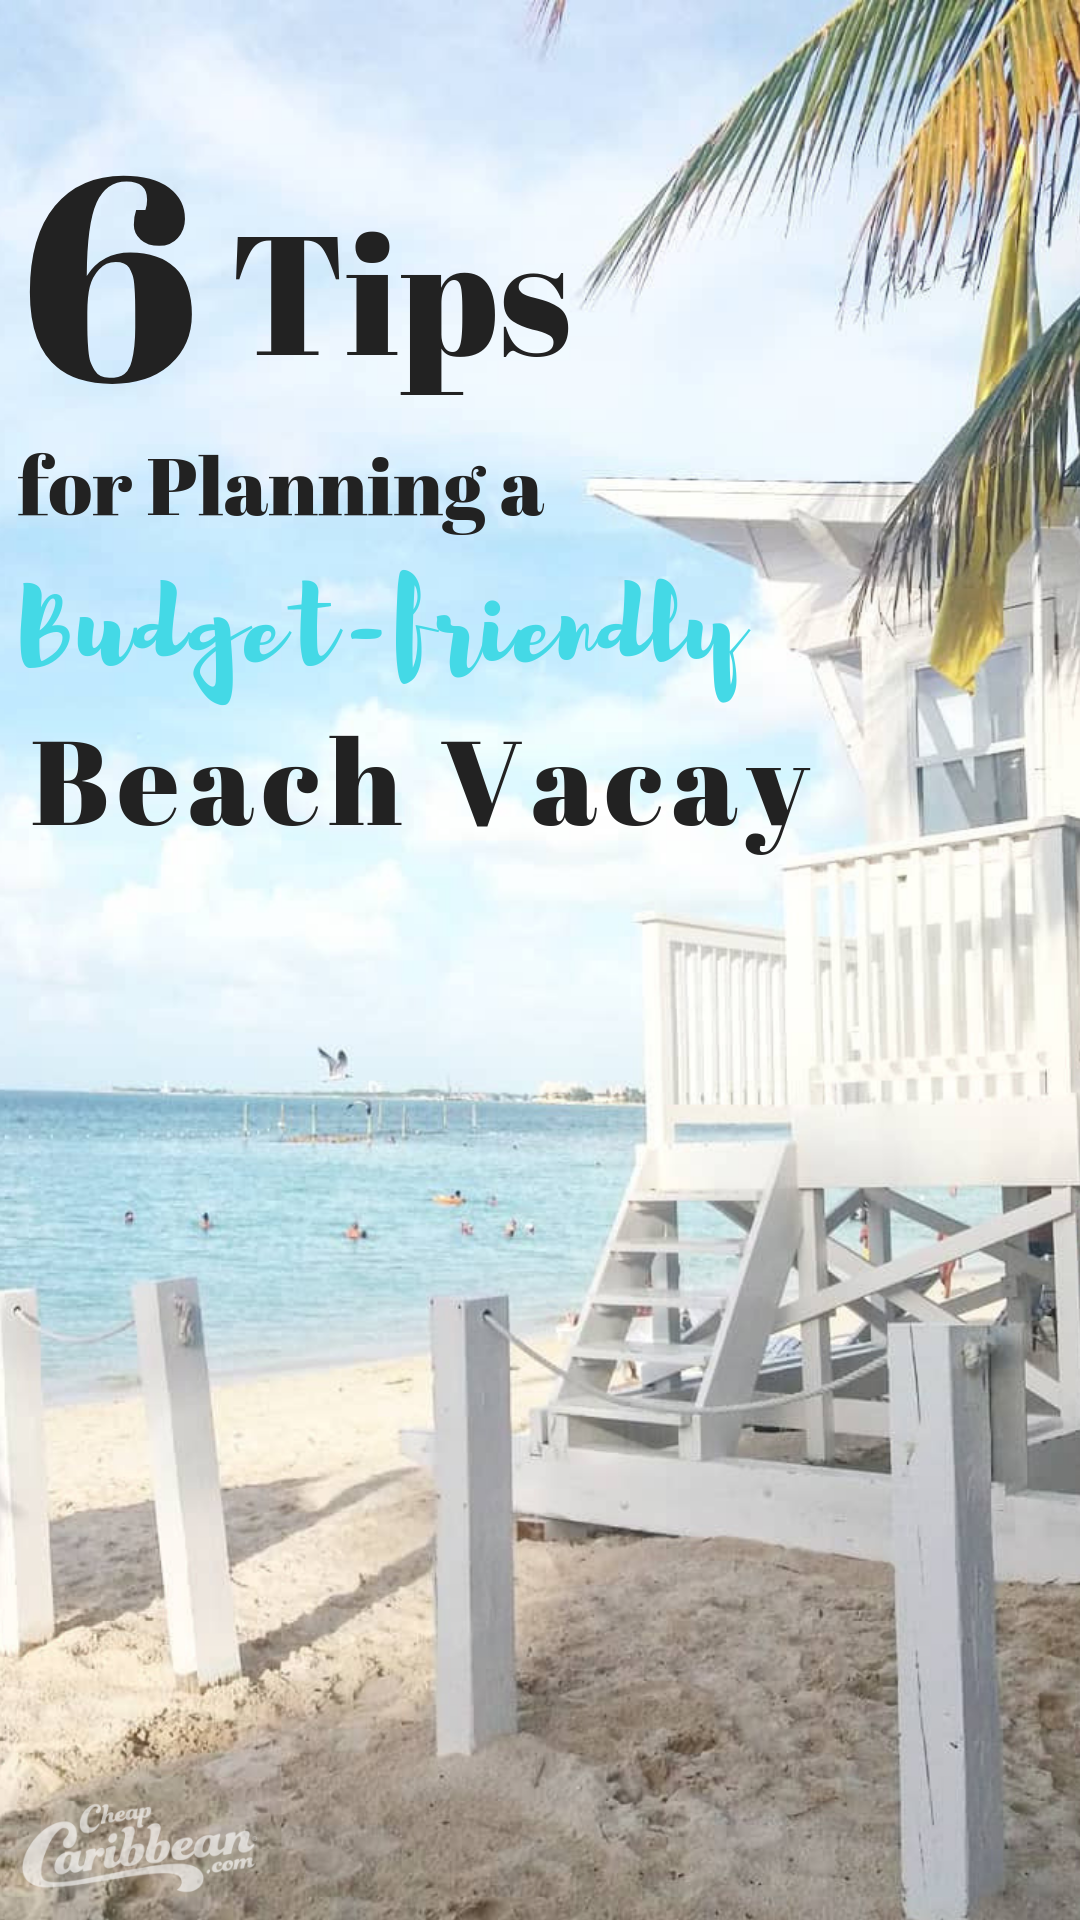 6 Tips for Planning a Budget